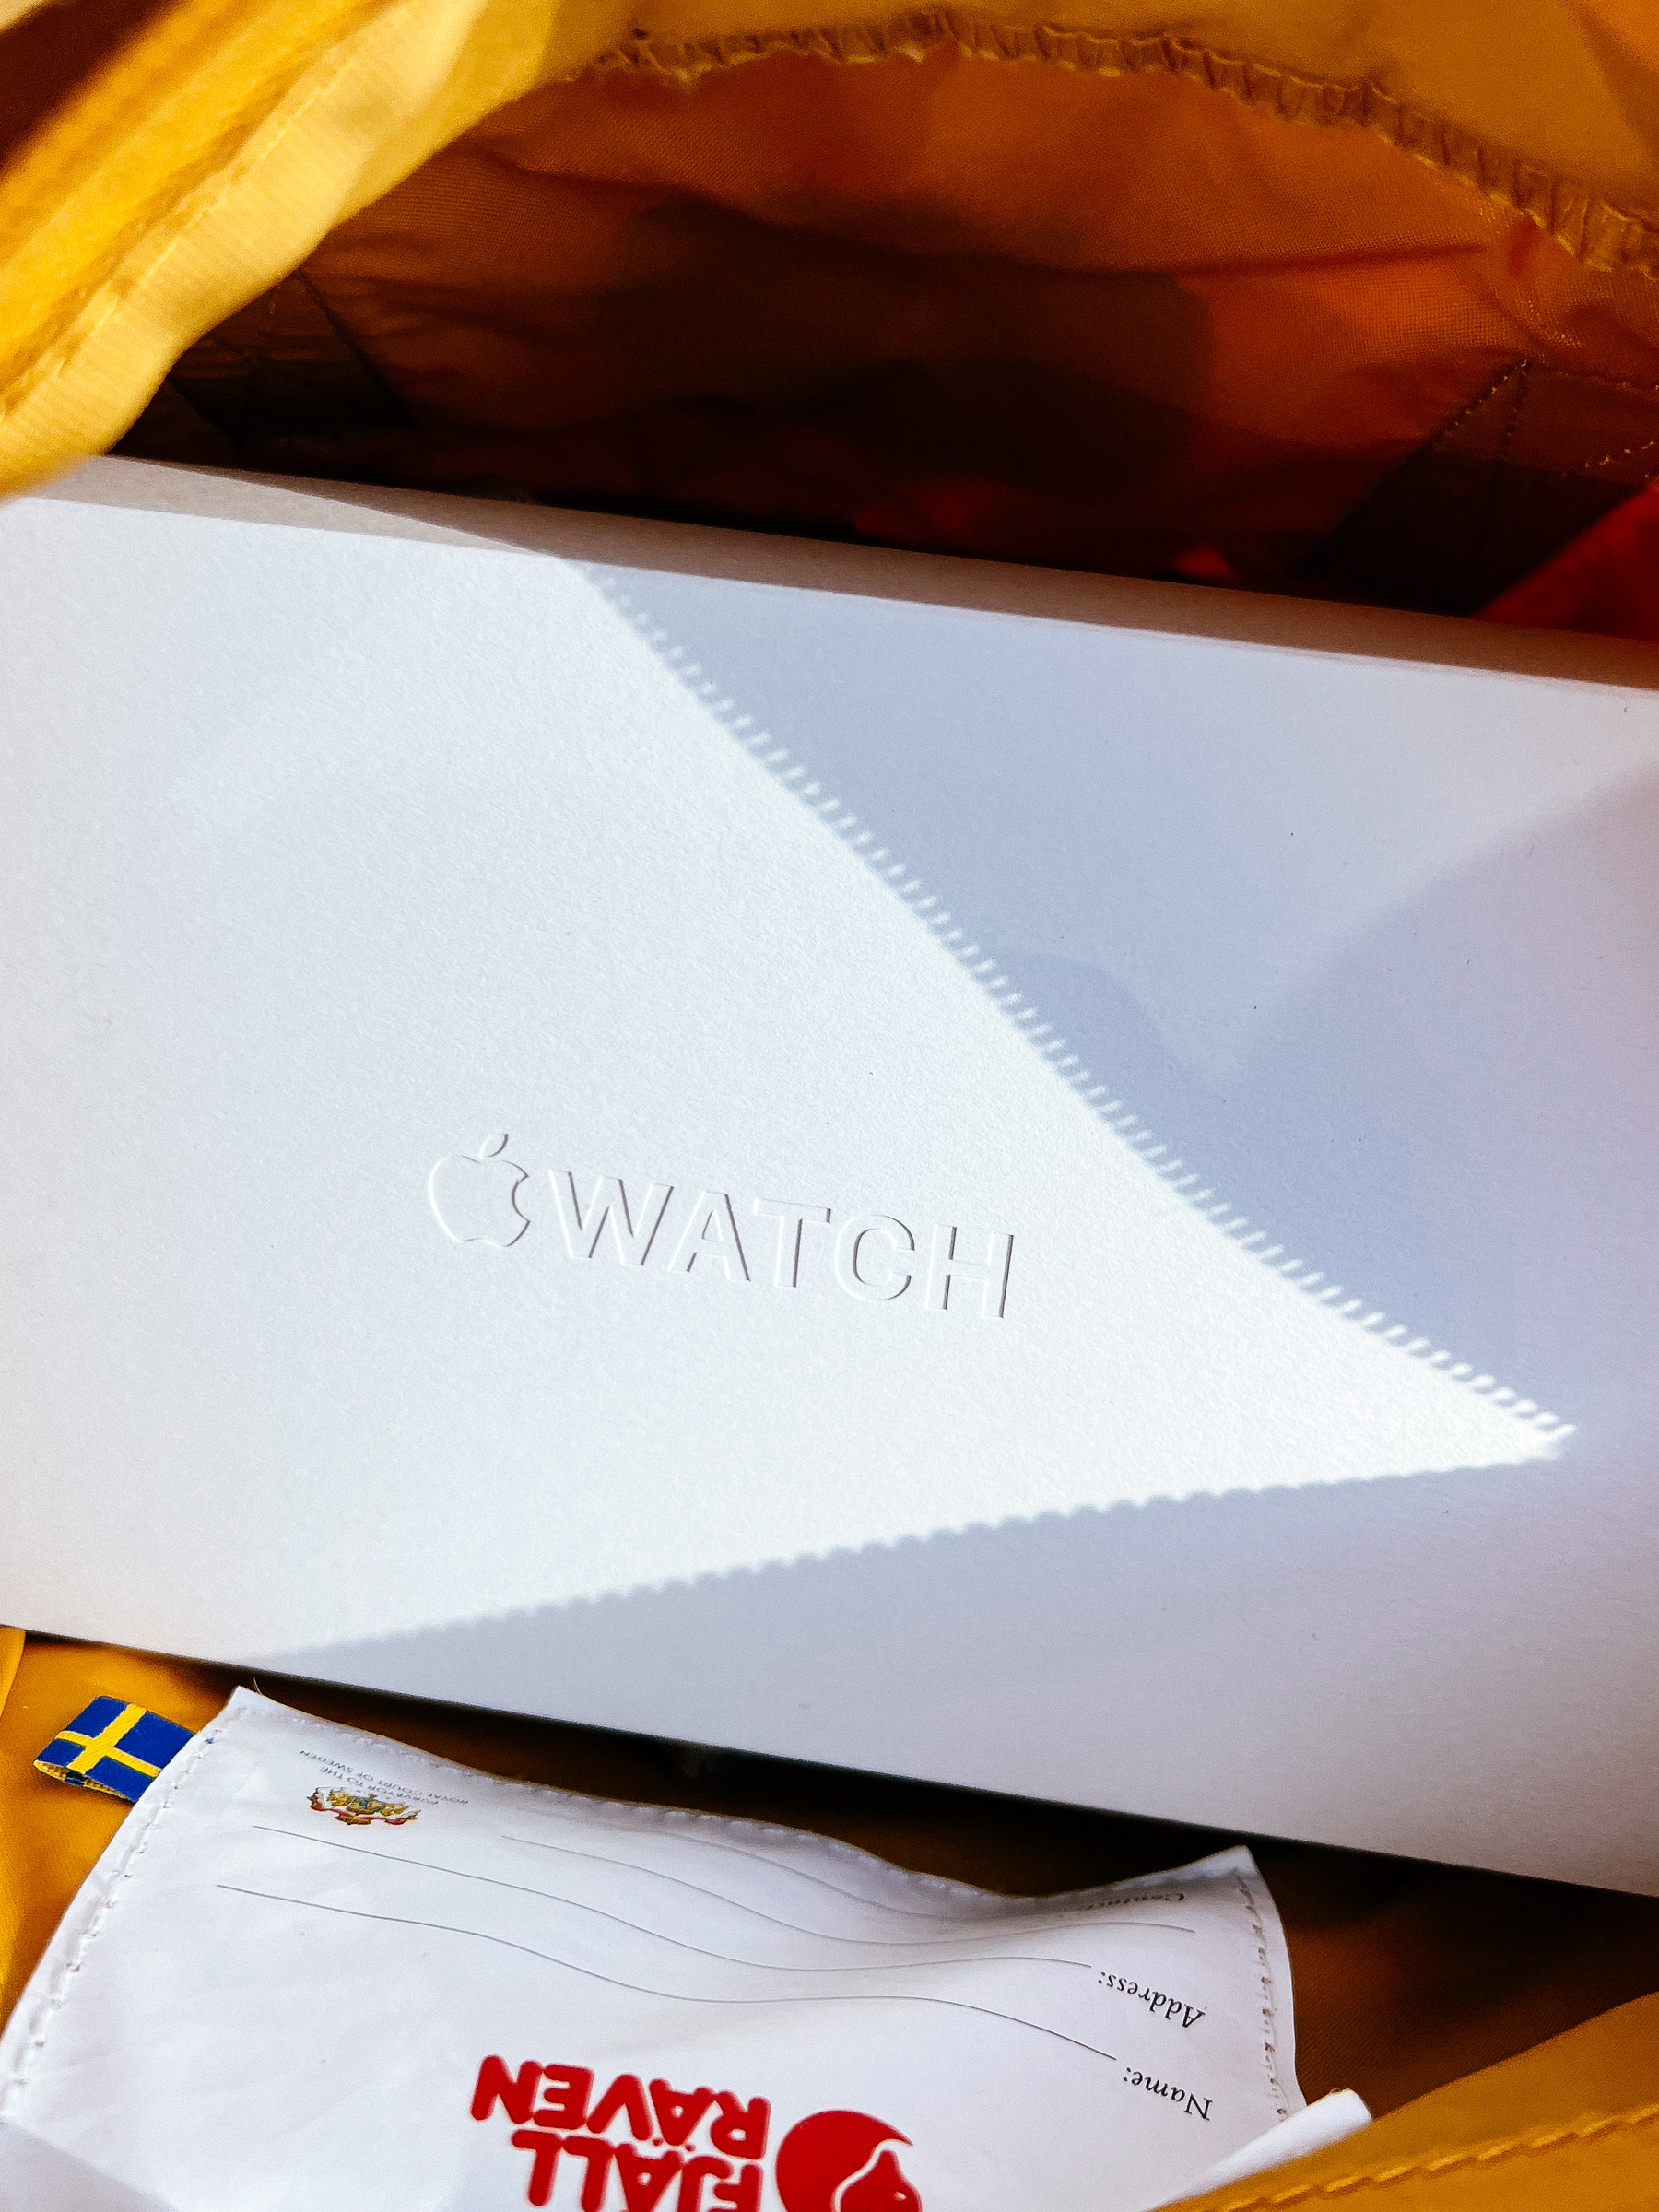 Looking down into a backpack, you can see the box of an Apple Watch